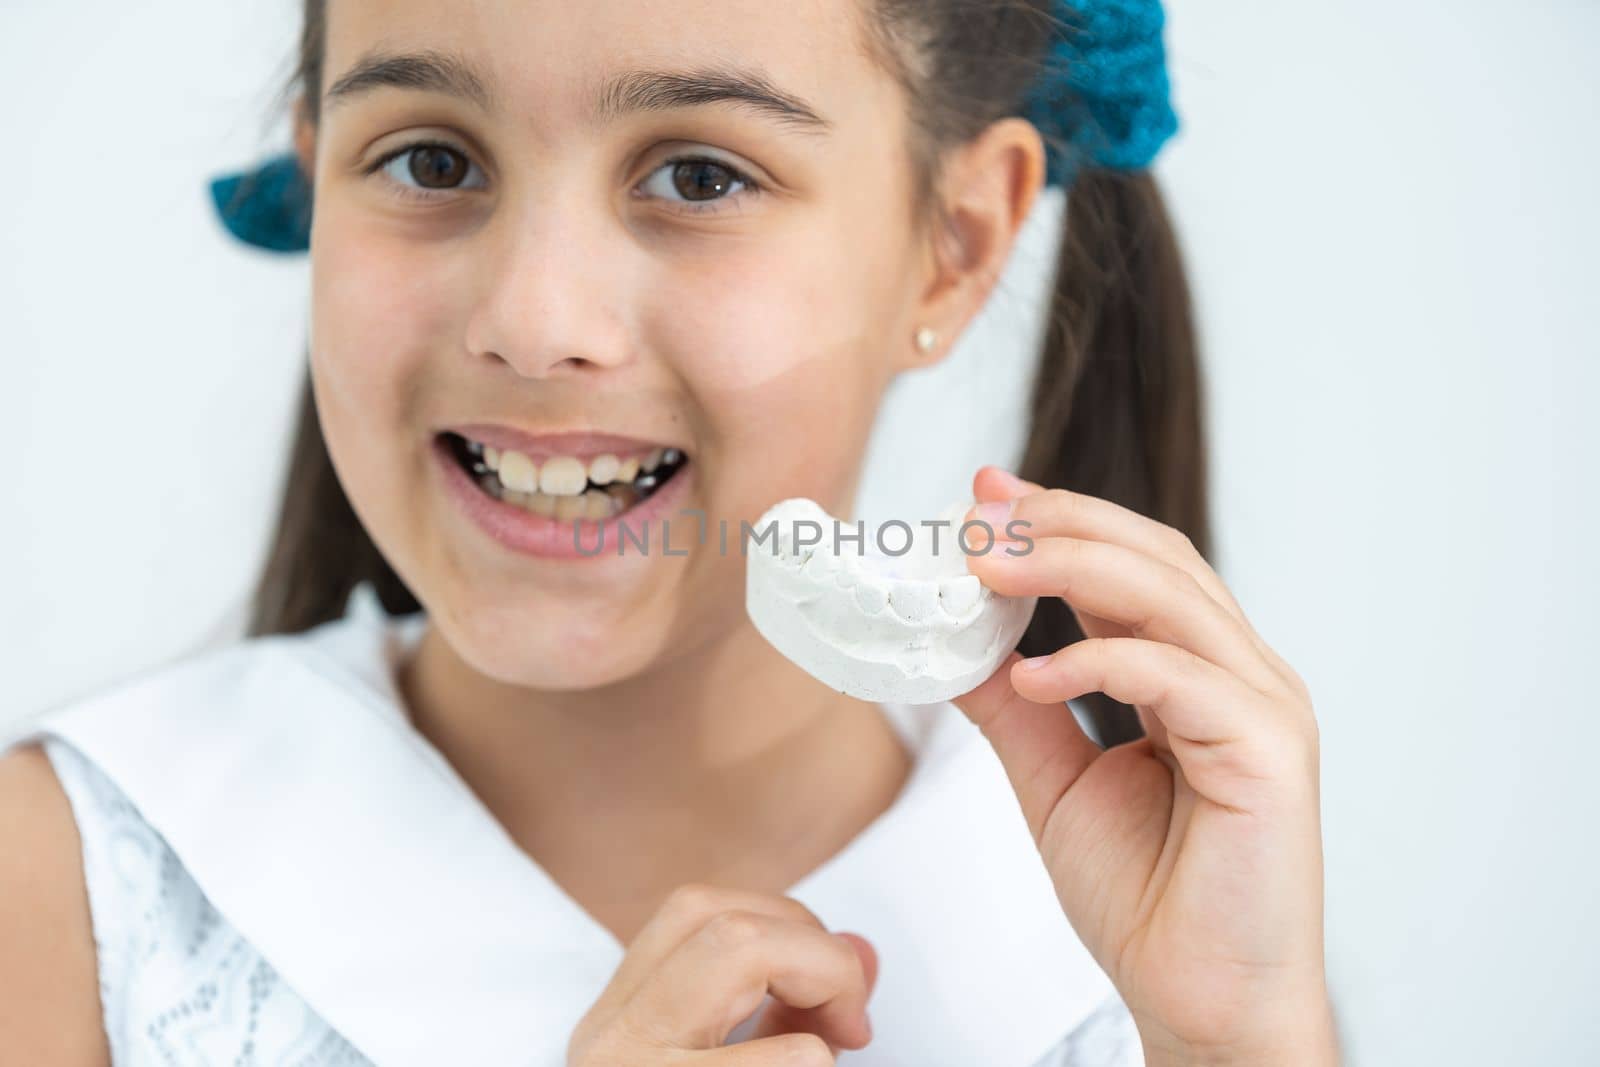 little girl with plaster cast of teeth and with the metal apparatus on the teeth